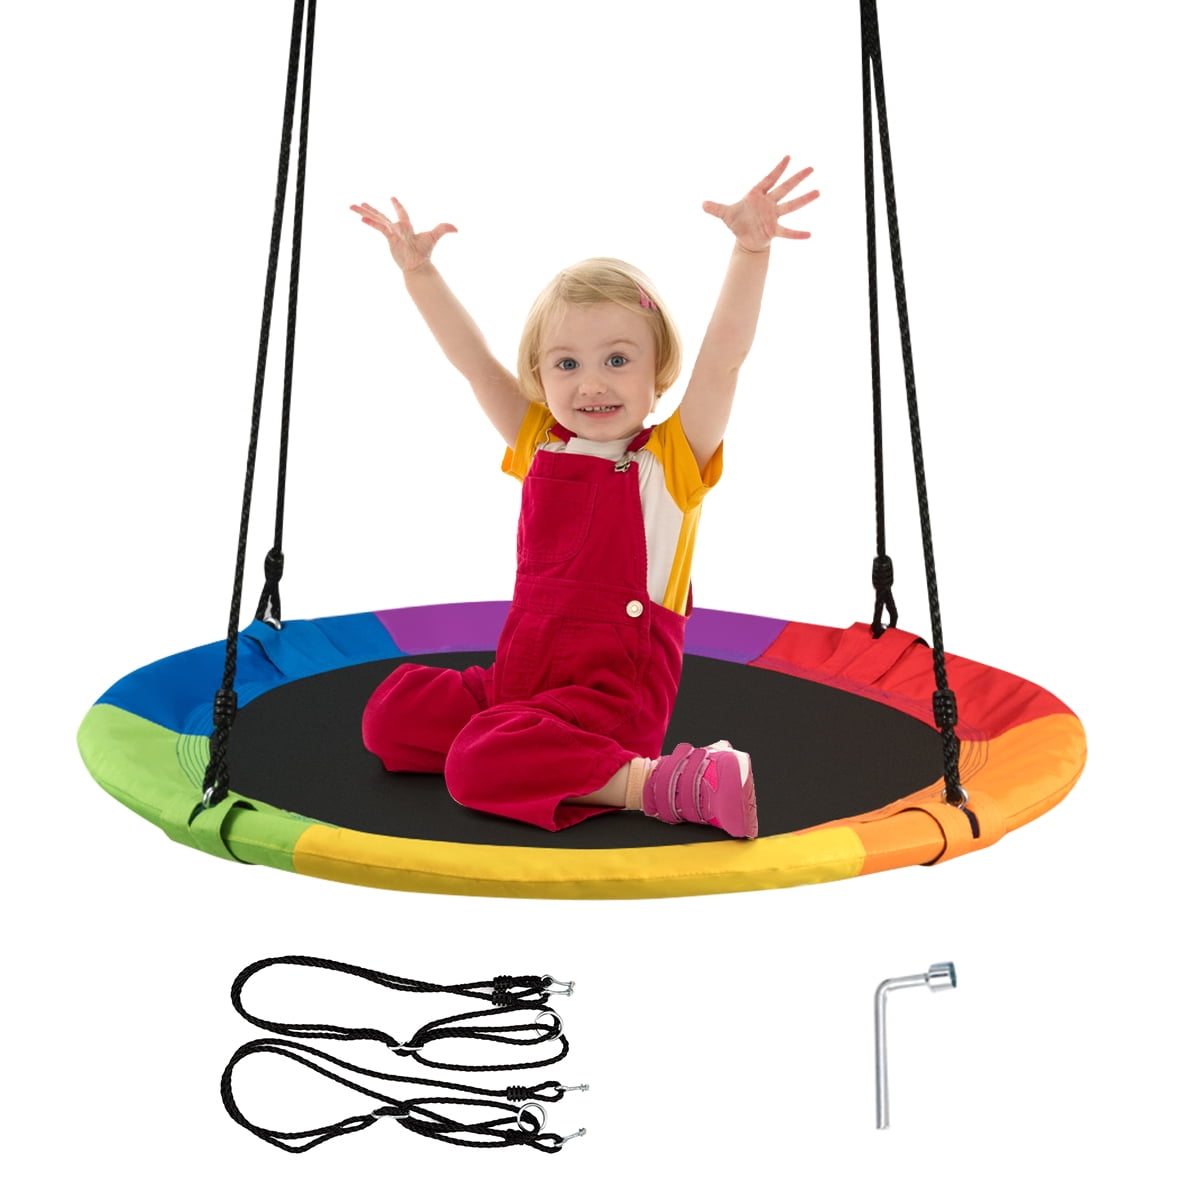 Goplus-40-Flying-Saucer-Tree-Swing-Indoor-Outdoor-Play-Set-Swing-for-Kids-Colorful_277fbe12-e773-4289-bb40-ce662582e655_1.52a48322cd0c15a331126aa740df4974.jpeg?odnHeight=2000&odnWidth=2000&odnBg=FFFFFF